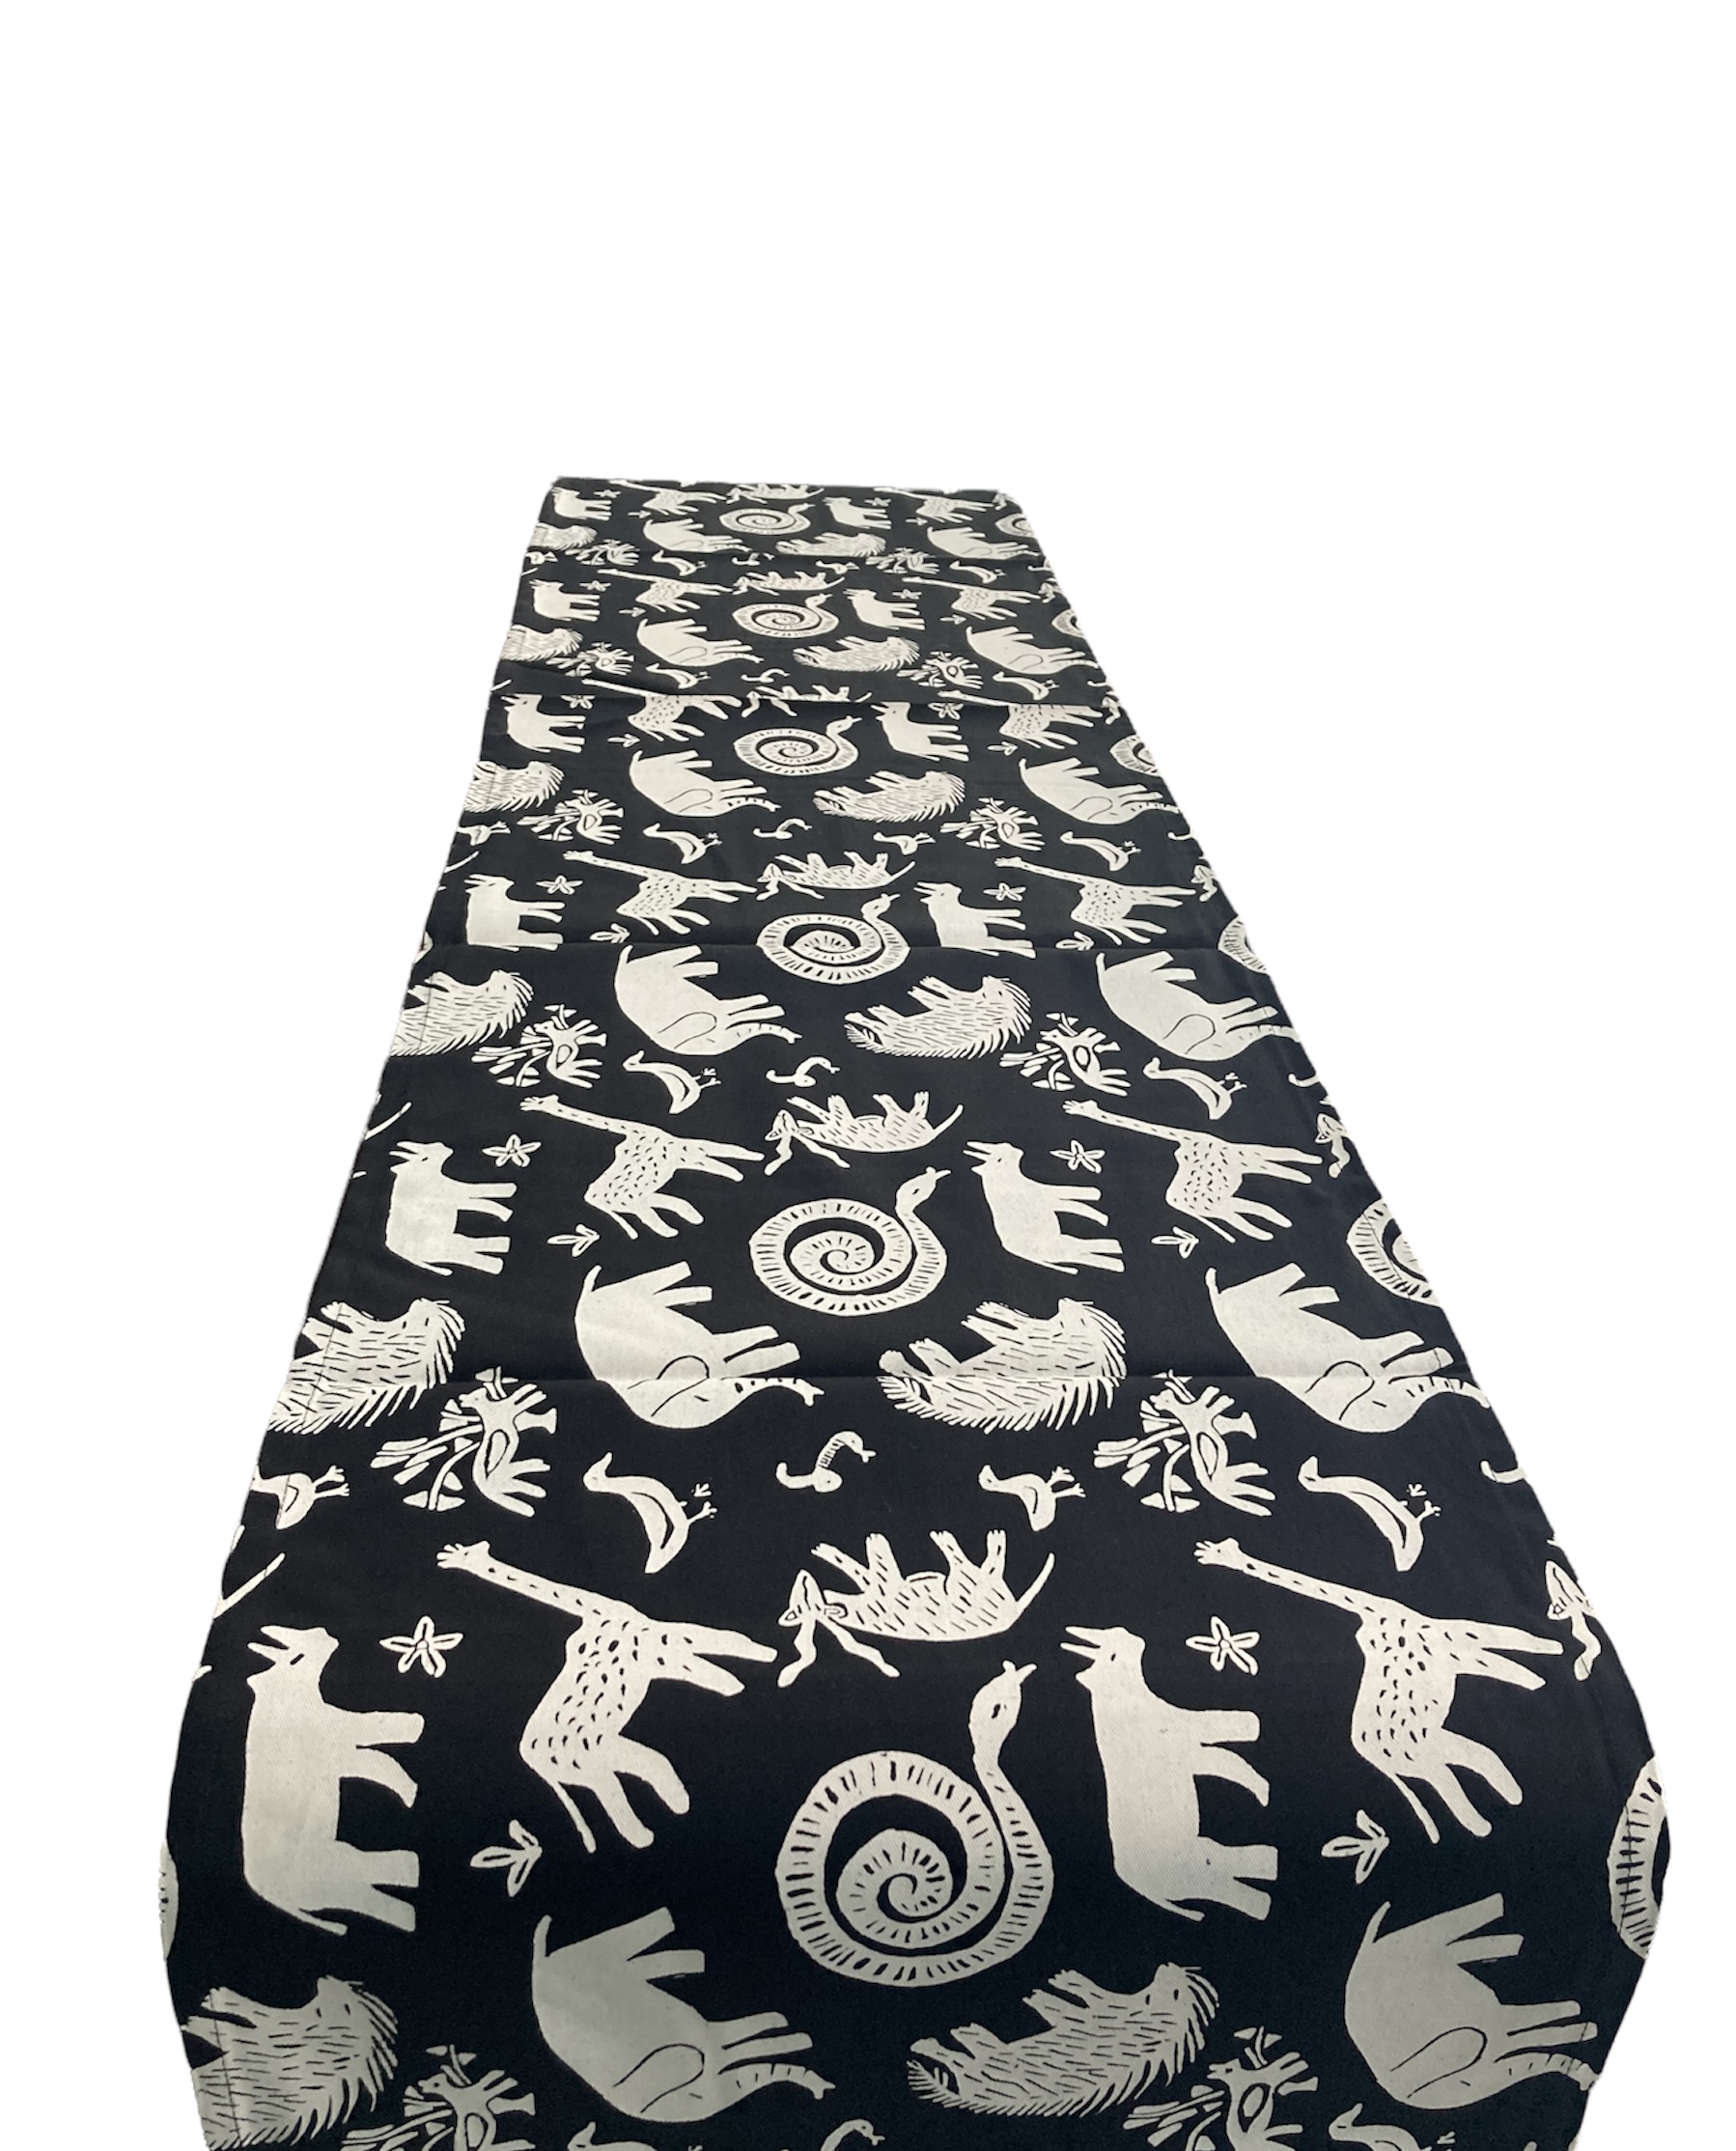 100% cotton Table Runner 96\" x 16\" from Namibia - Design wb04l